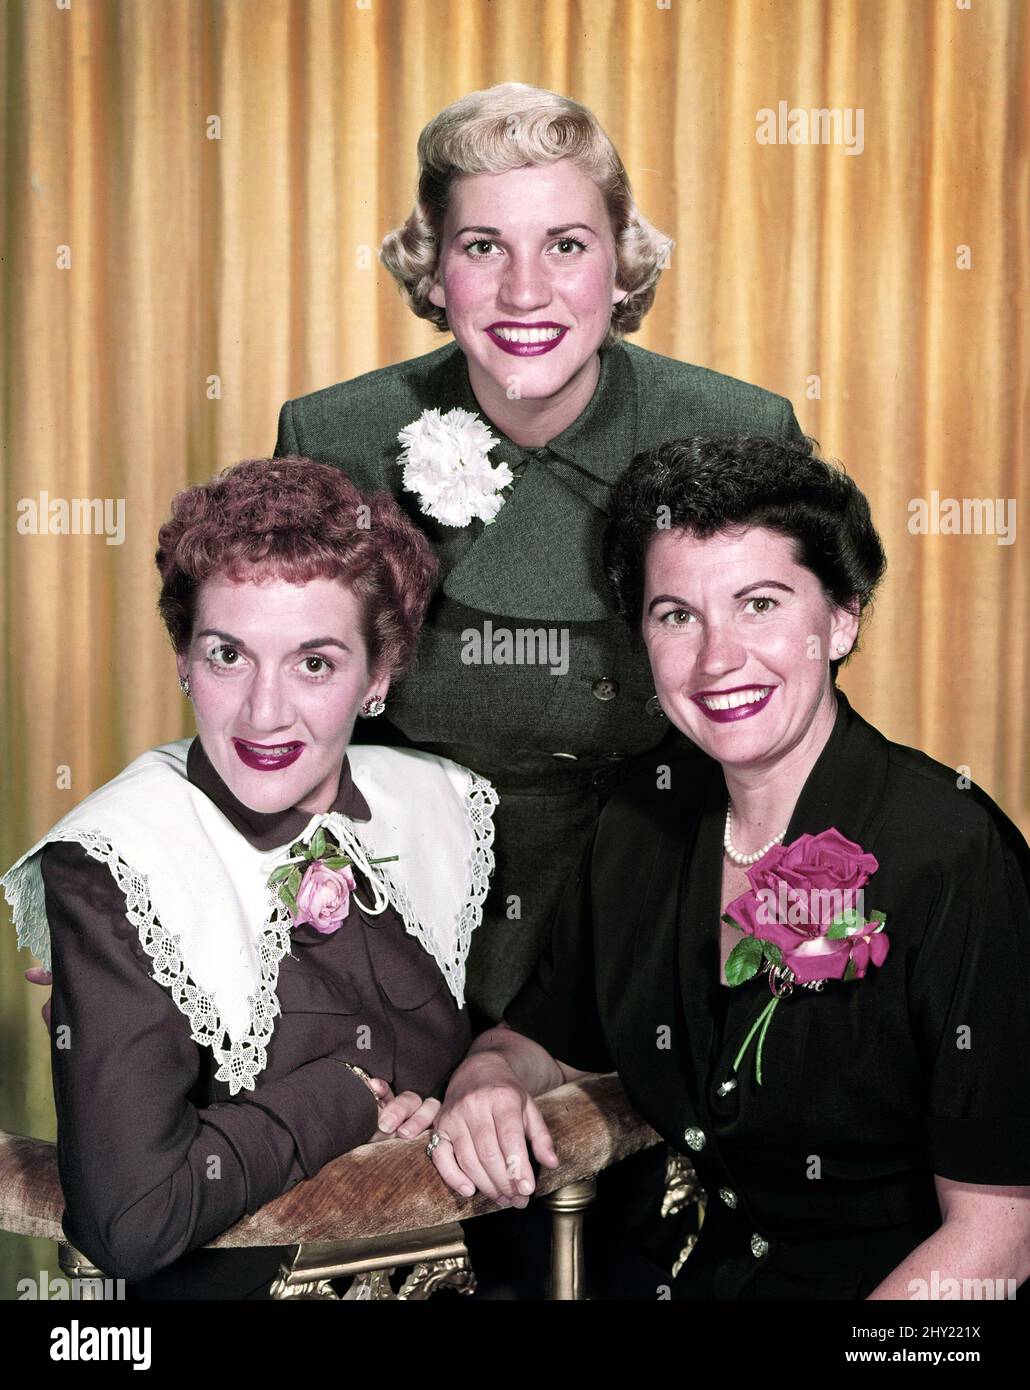 Laverne Andrews, Maxene Andrews, Patty Andrews (The Andrews Sisters), circa 1952. File Reference # 34145-533THA Stock Photo